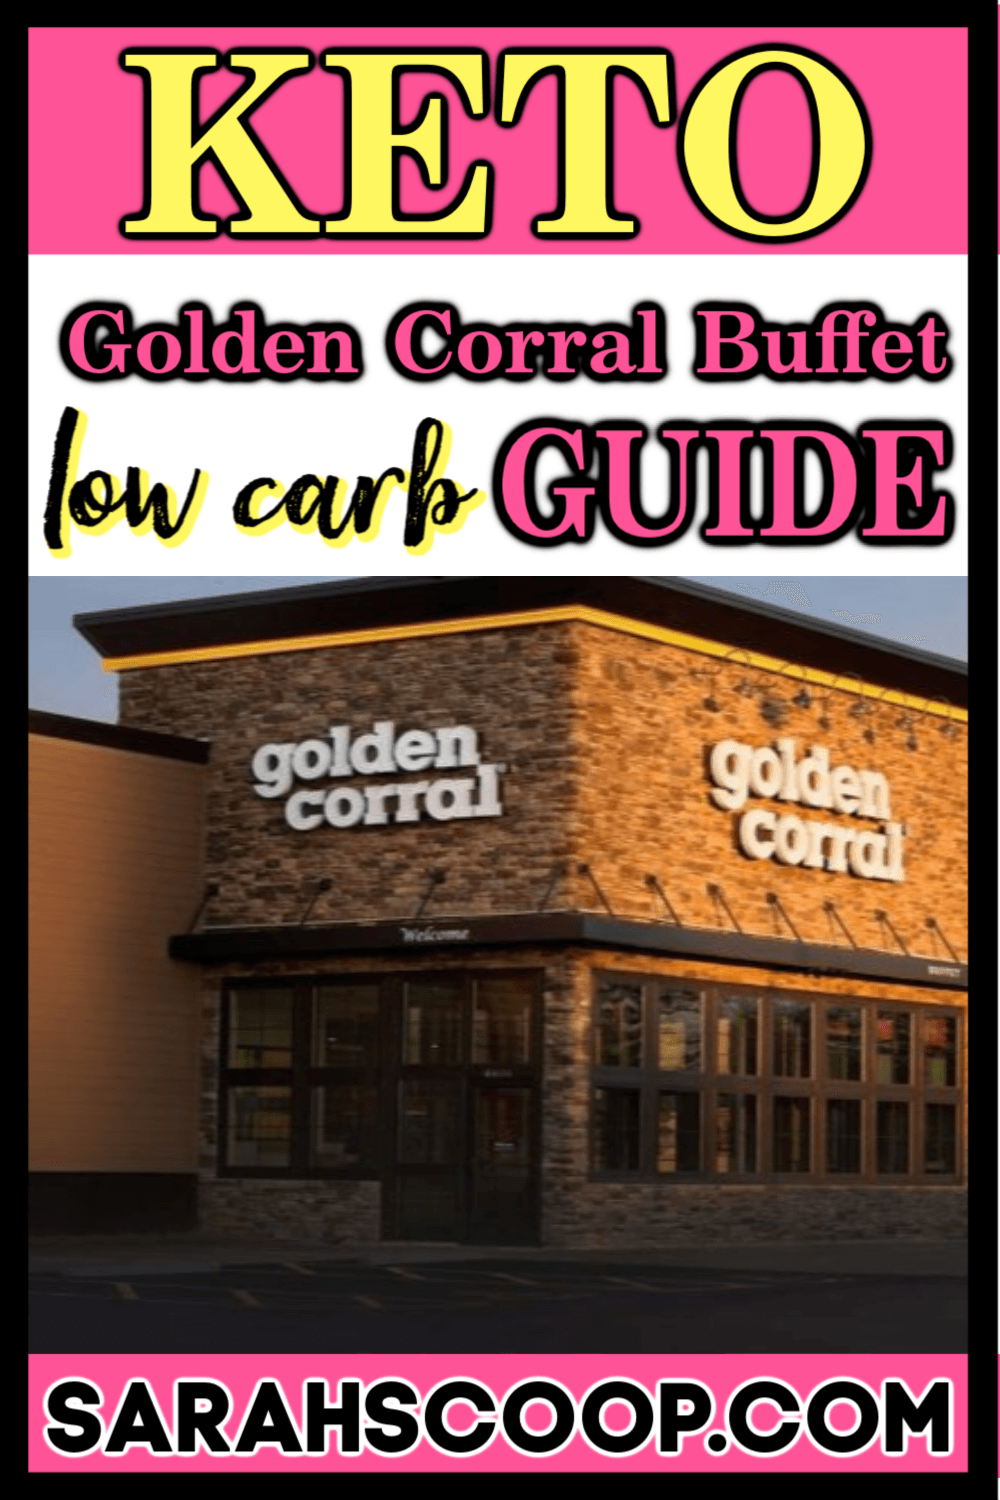 Keto golden coral buffet low carb guide modified with keywords: low carb buffet guide.